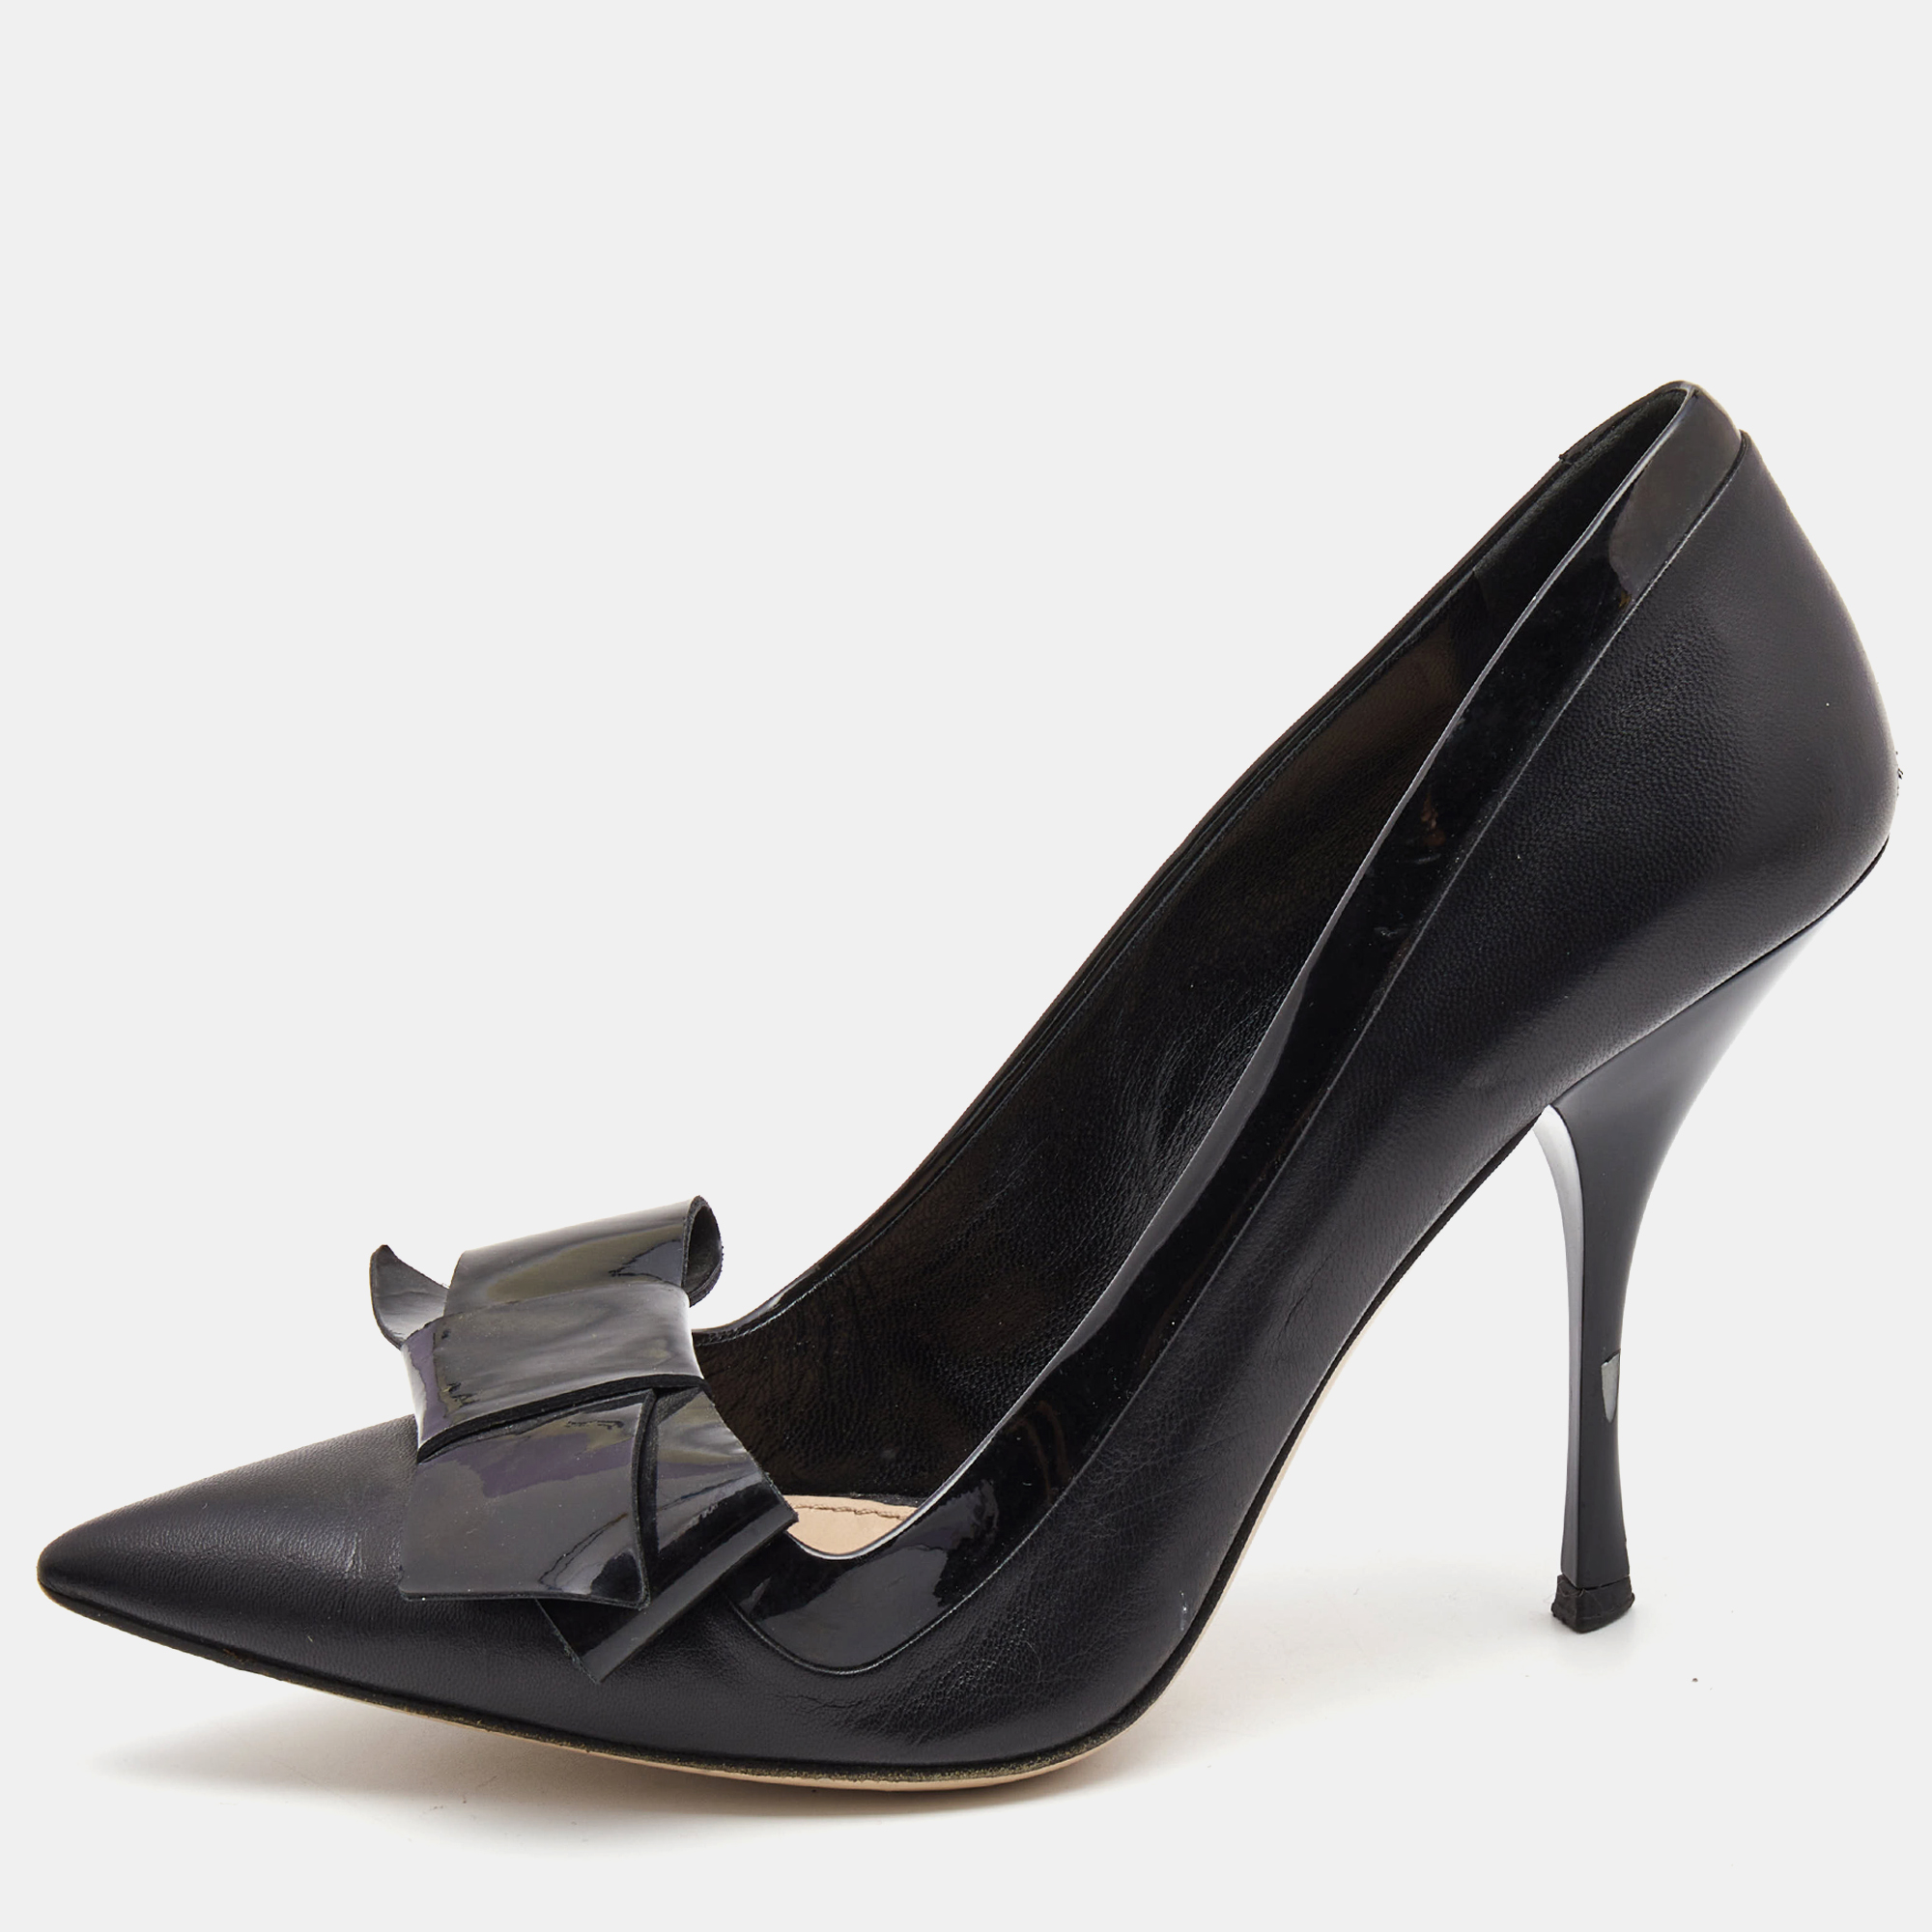 Miu Miu Black Patent And Leather Bow Pointed Toe Pumps Size 37